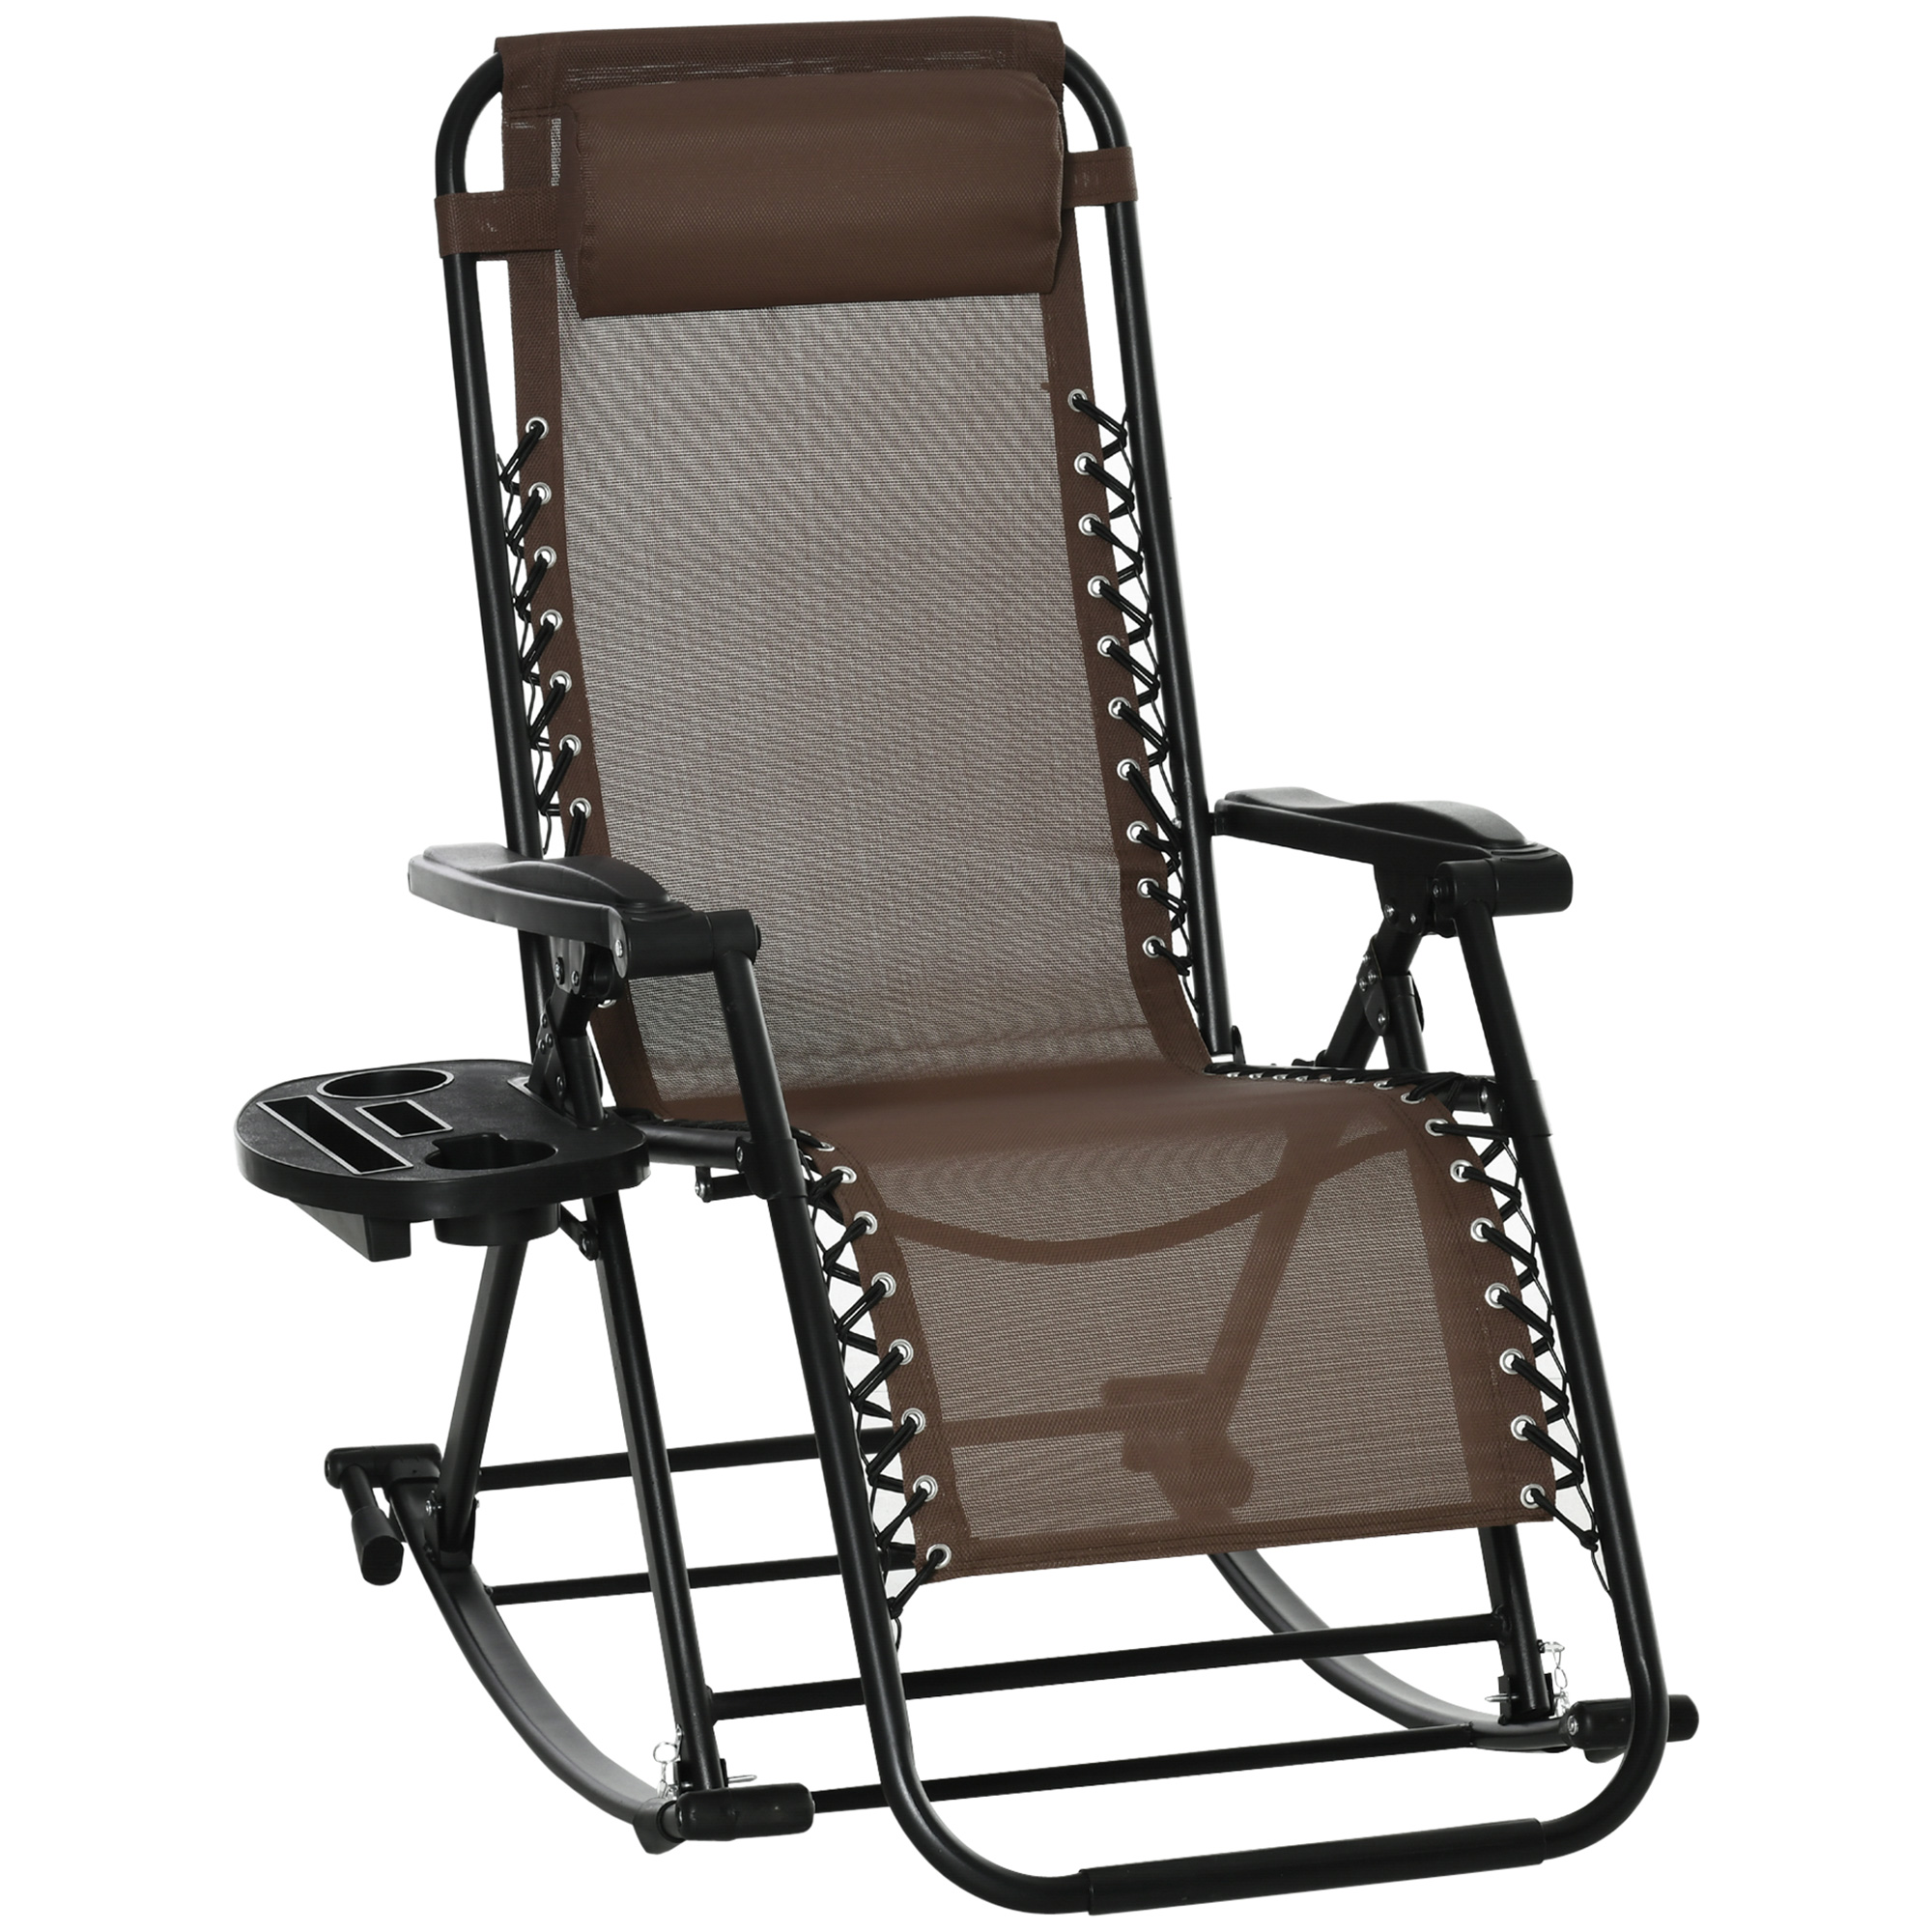 Outsunny Rocking Zero Gravity Lounge Chair, Folding, Brown - image 1 of 9